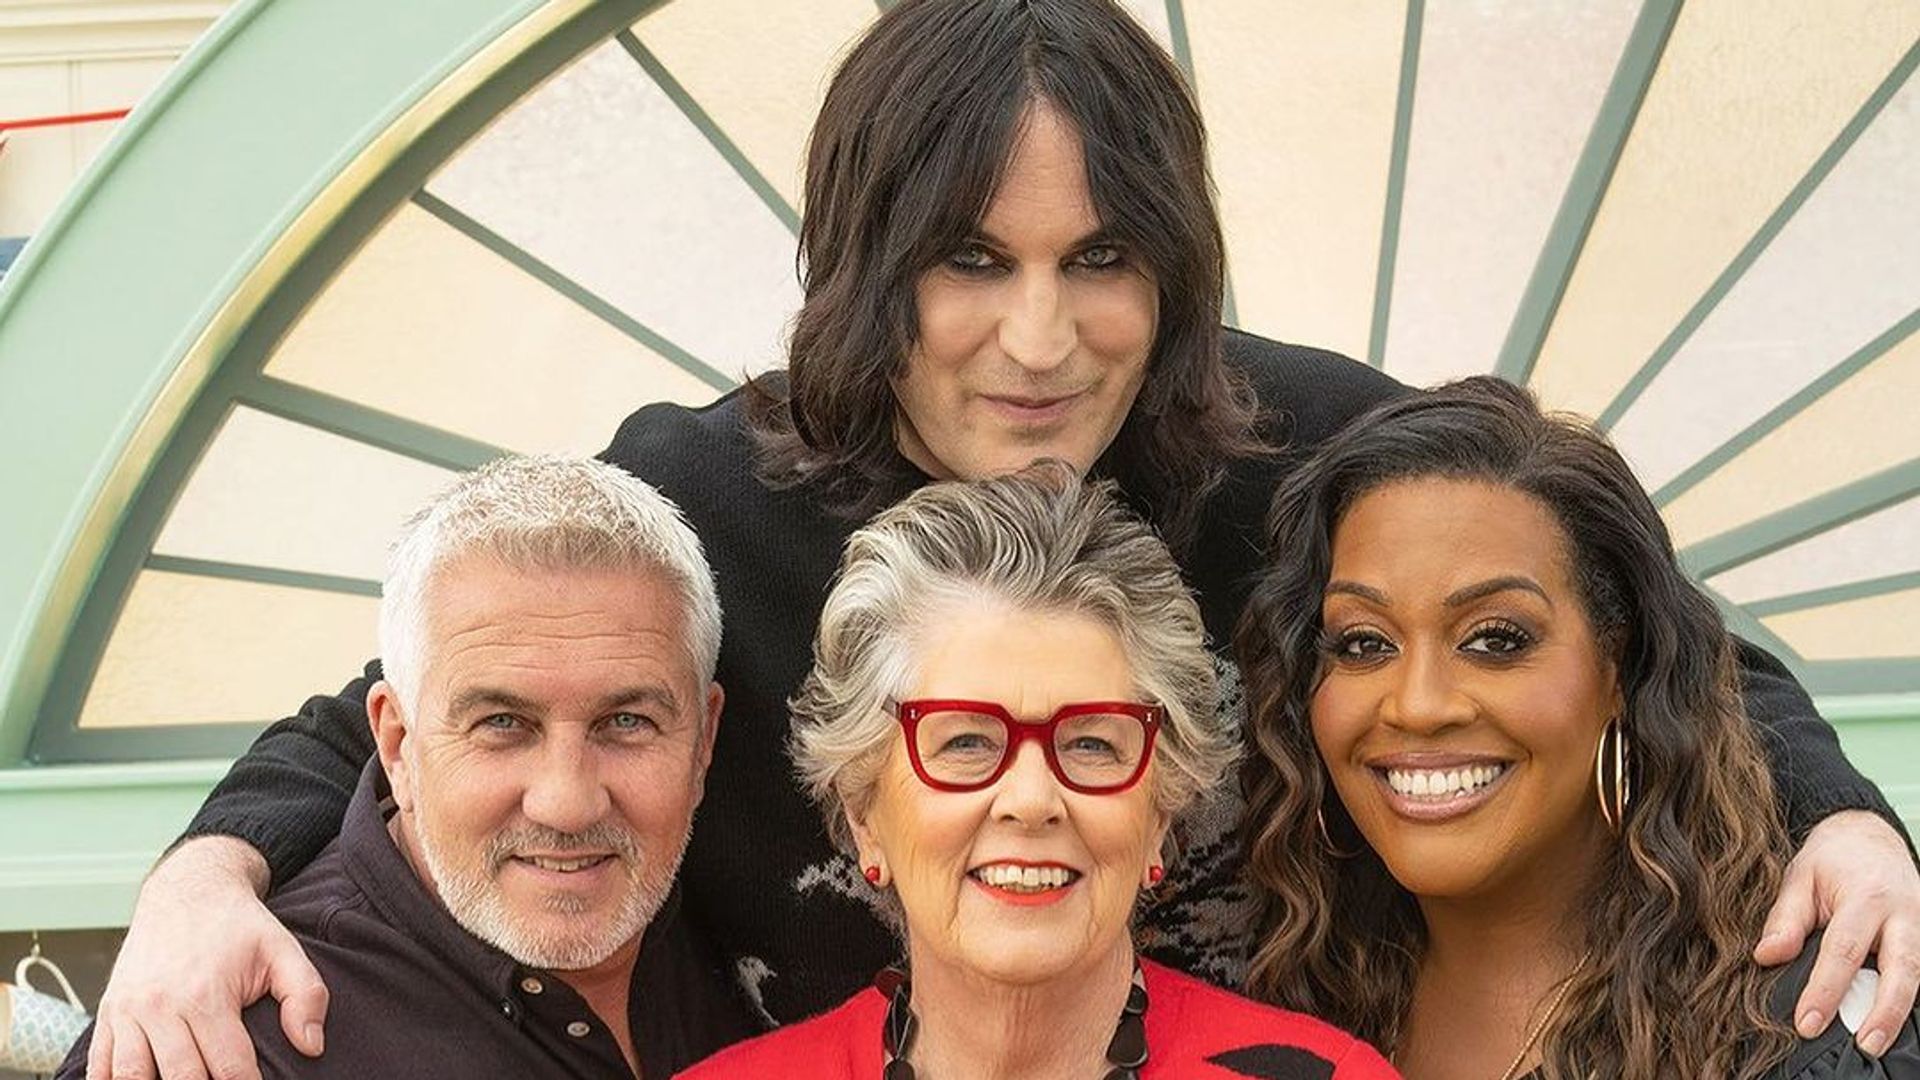 Noel Fielding, Paul Hollywood, Prue Leith and Alison Hammond on Great British Bake Off